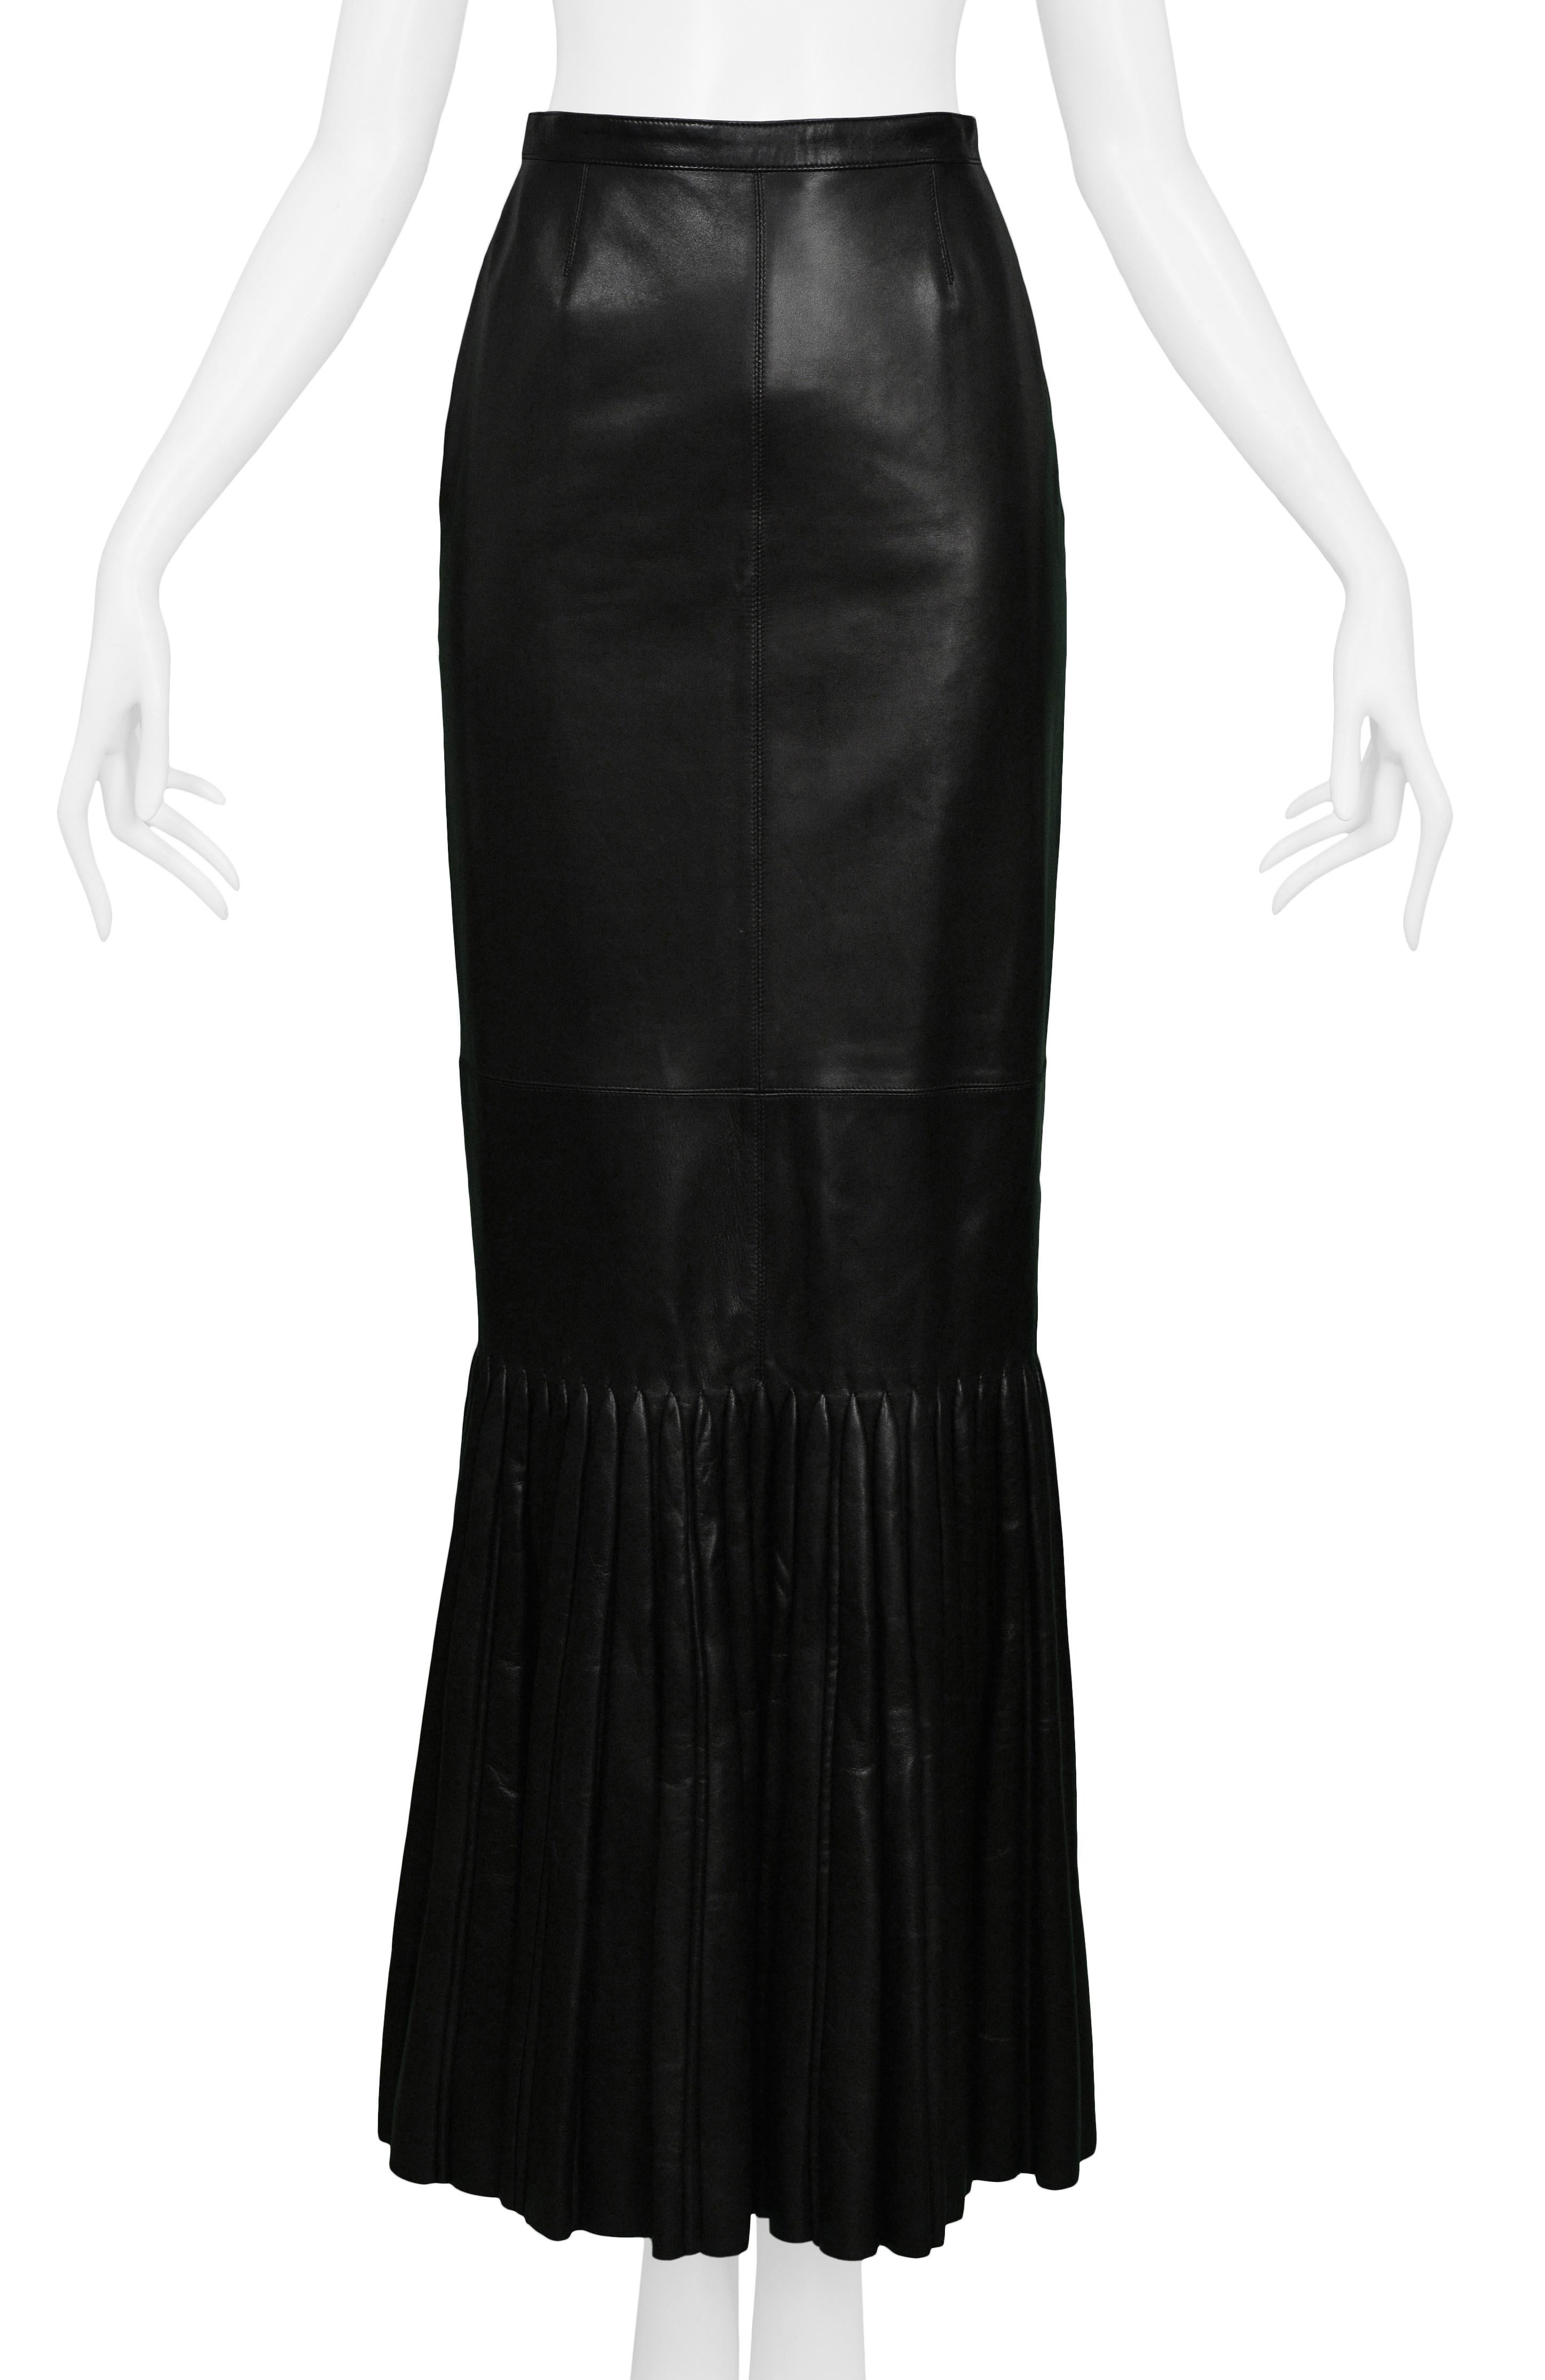 Vintage Azzedine Alaia black leather mermaid skirt with pleated flounce. This skirt has paneling along the front and back midsection and is made of luxurious leather. This skirt features a snap button closure and a center zipper.  

Excellent